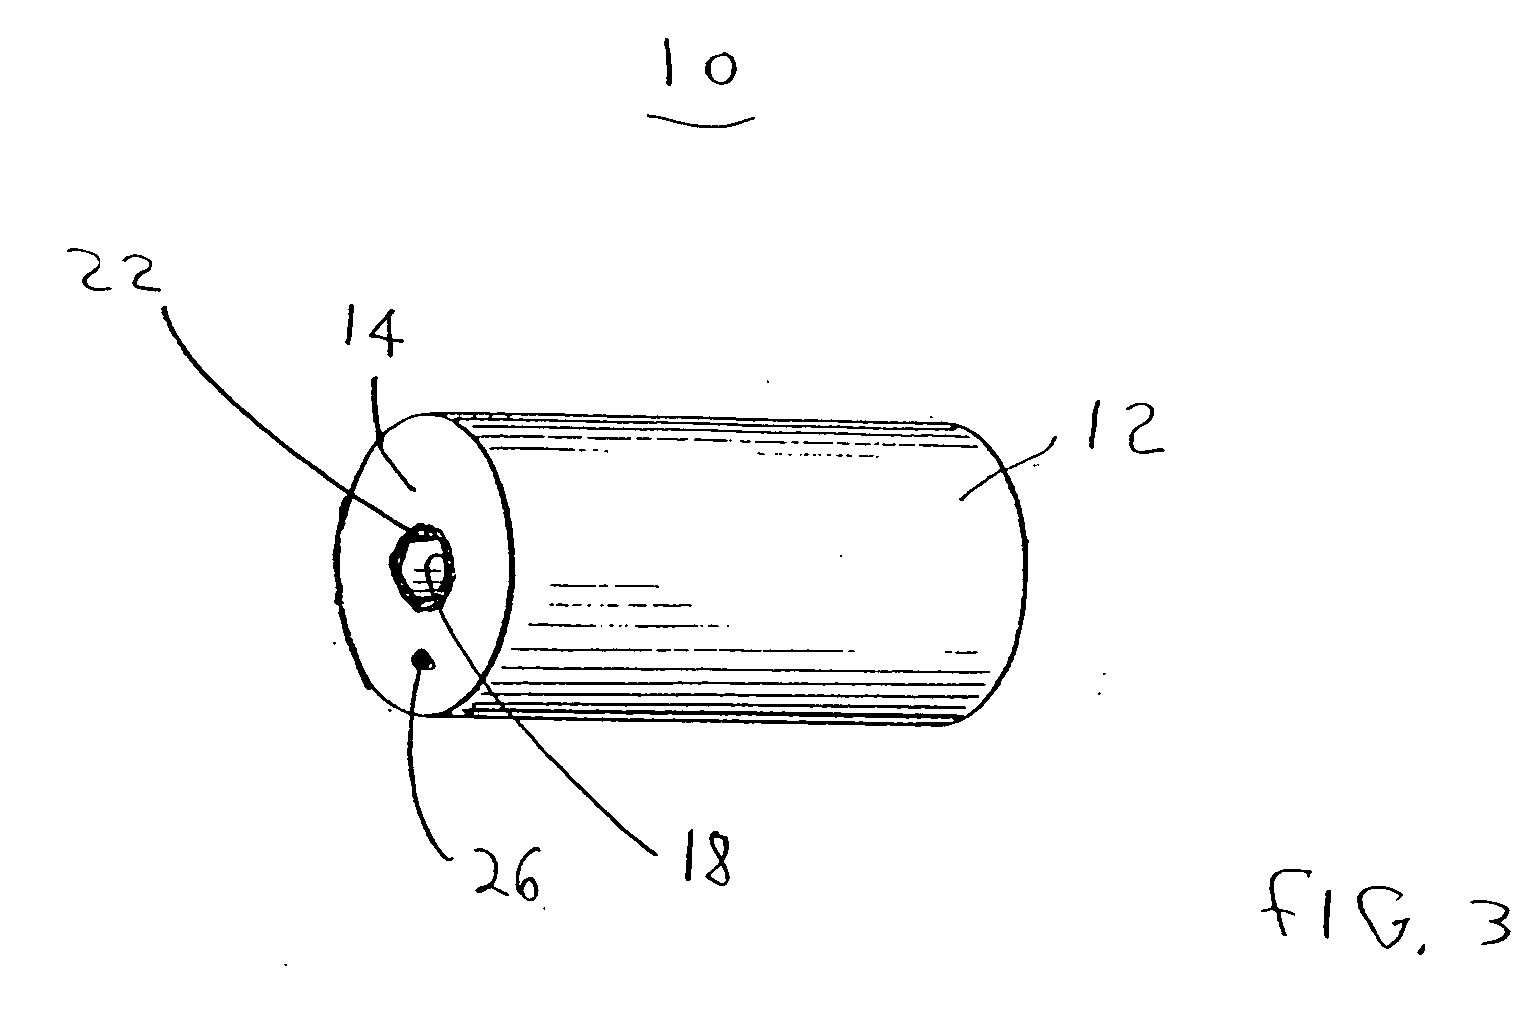 Wound capacitor having a thermal disconnect at a hot spot